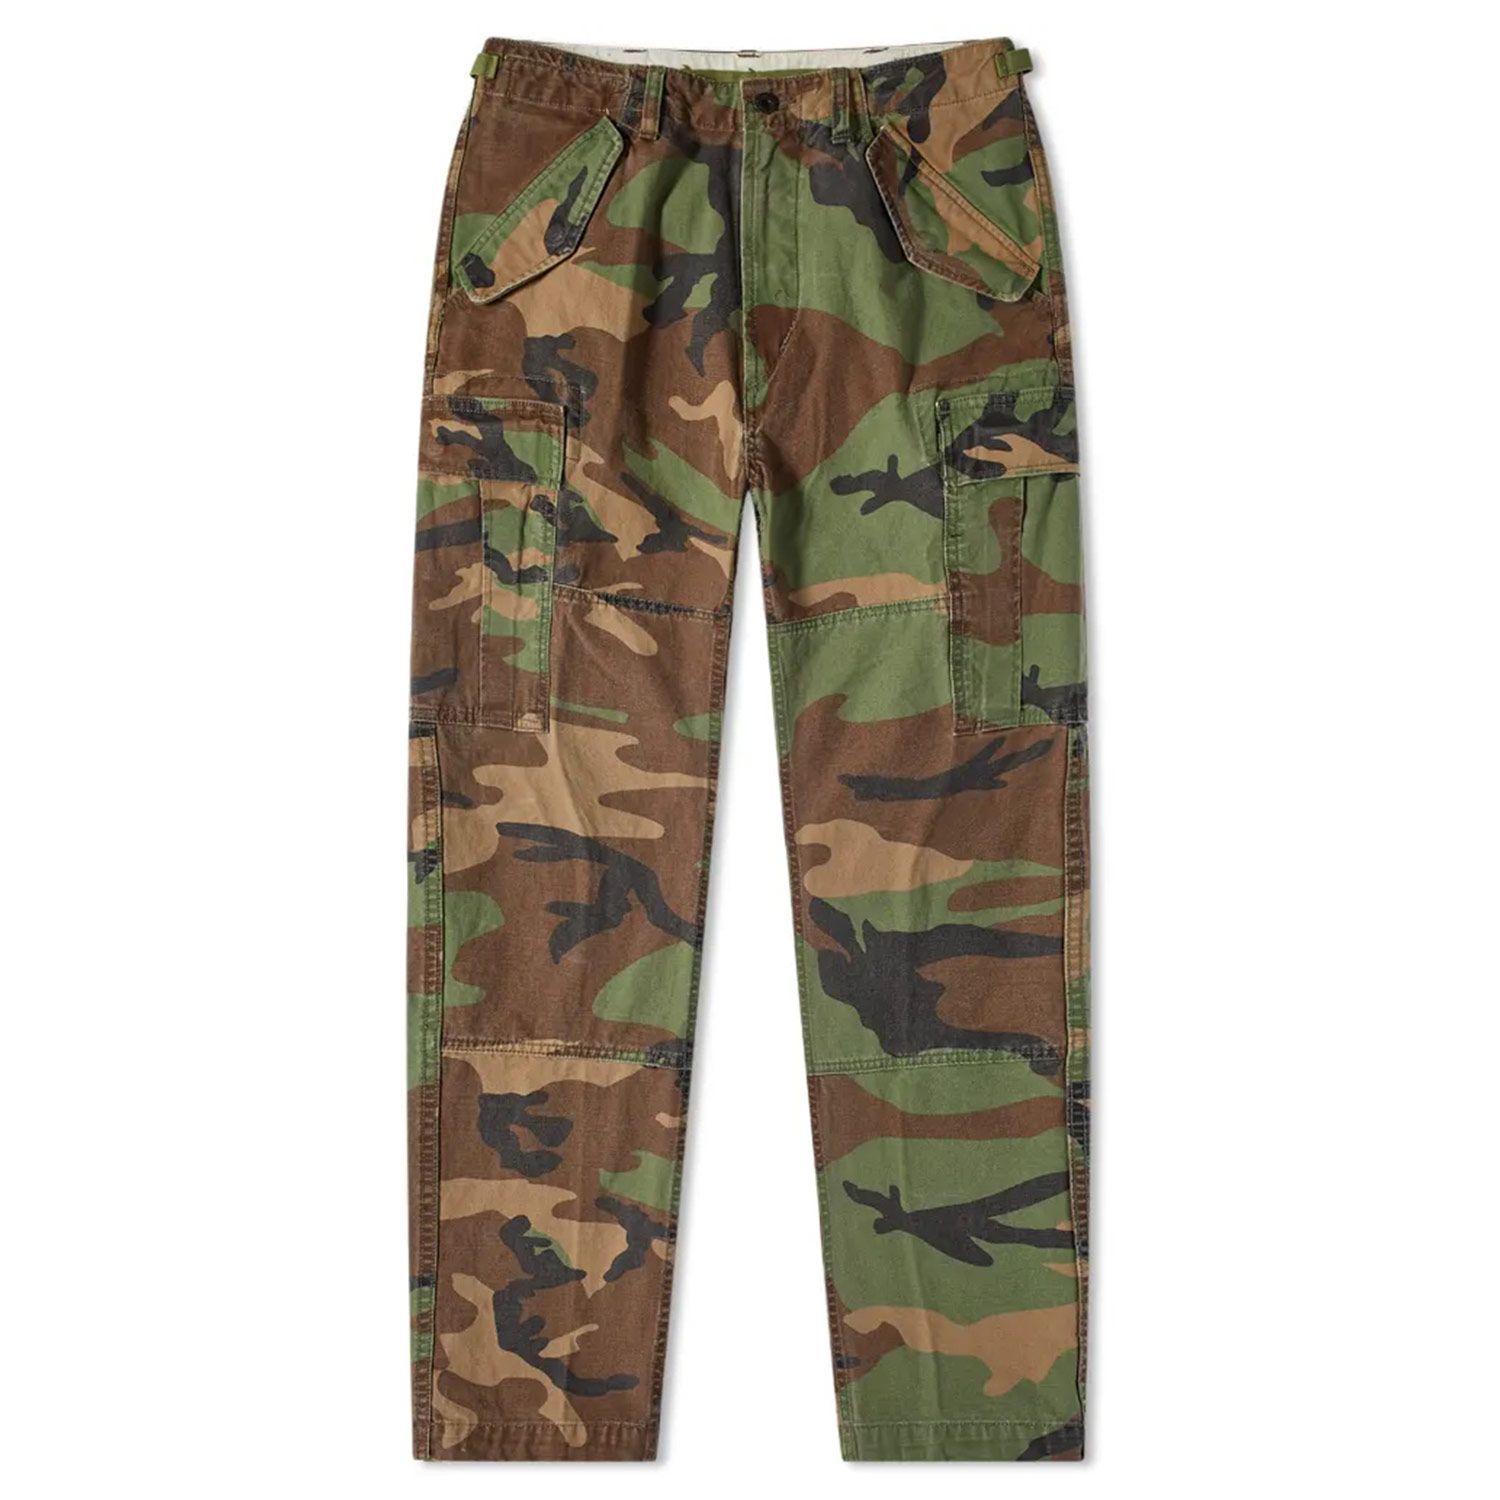 Homchy City Special Service Pants Military Fan Ix7 Multi Pocket  Overalls,Men Fashion Clothing-Best Gift for Lover - Walmart.com